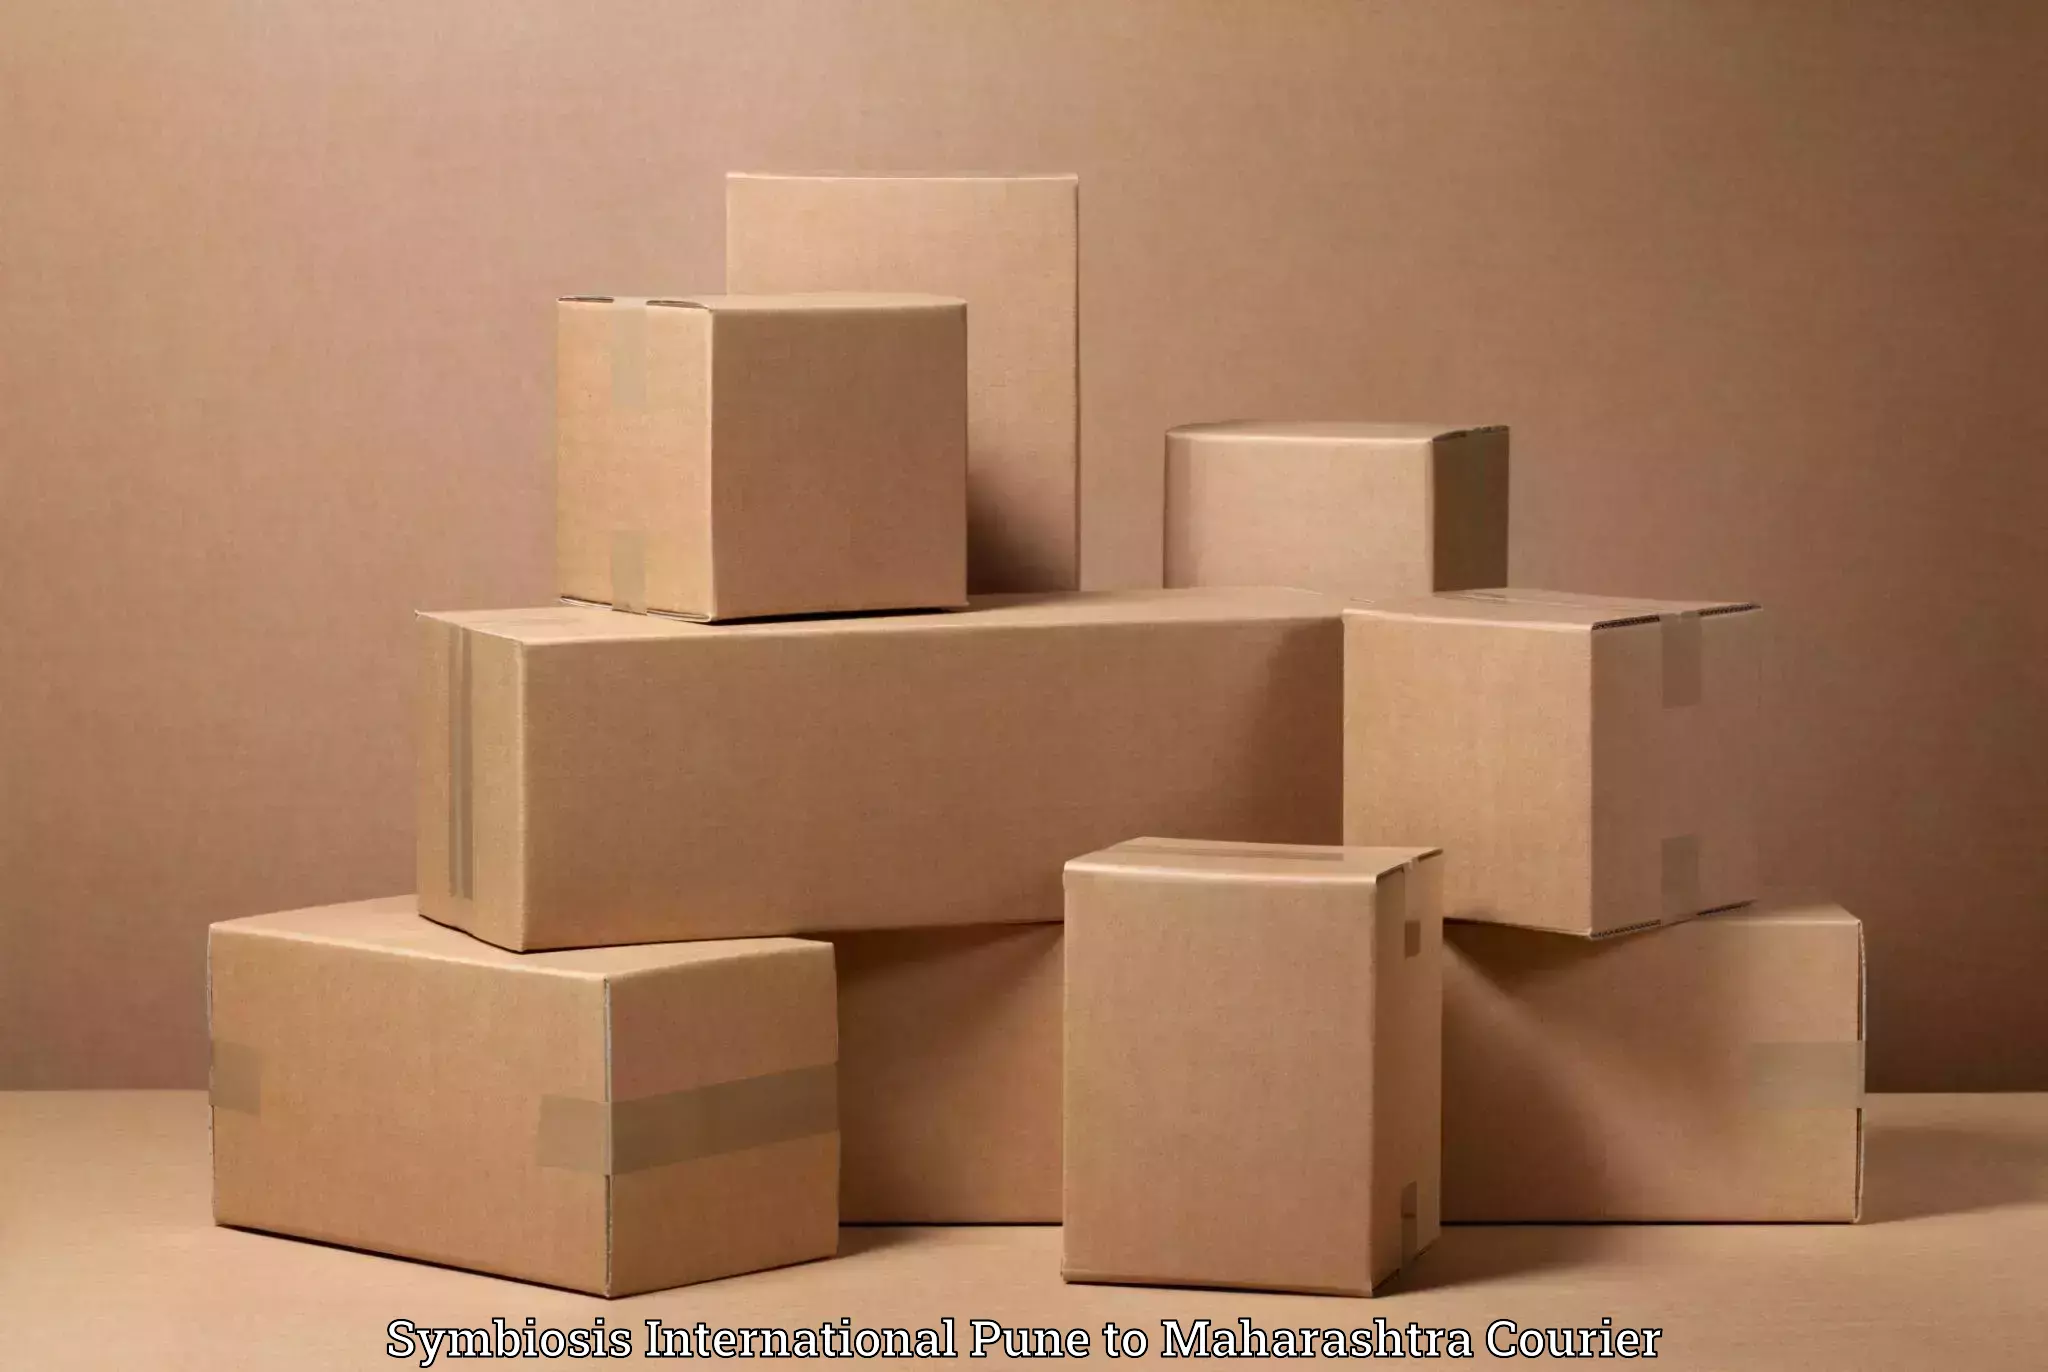 Professional movers and packers Symbiosis International Pune to Ahmednagar